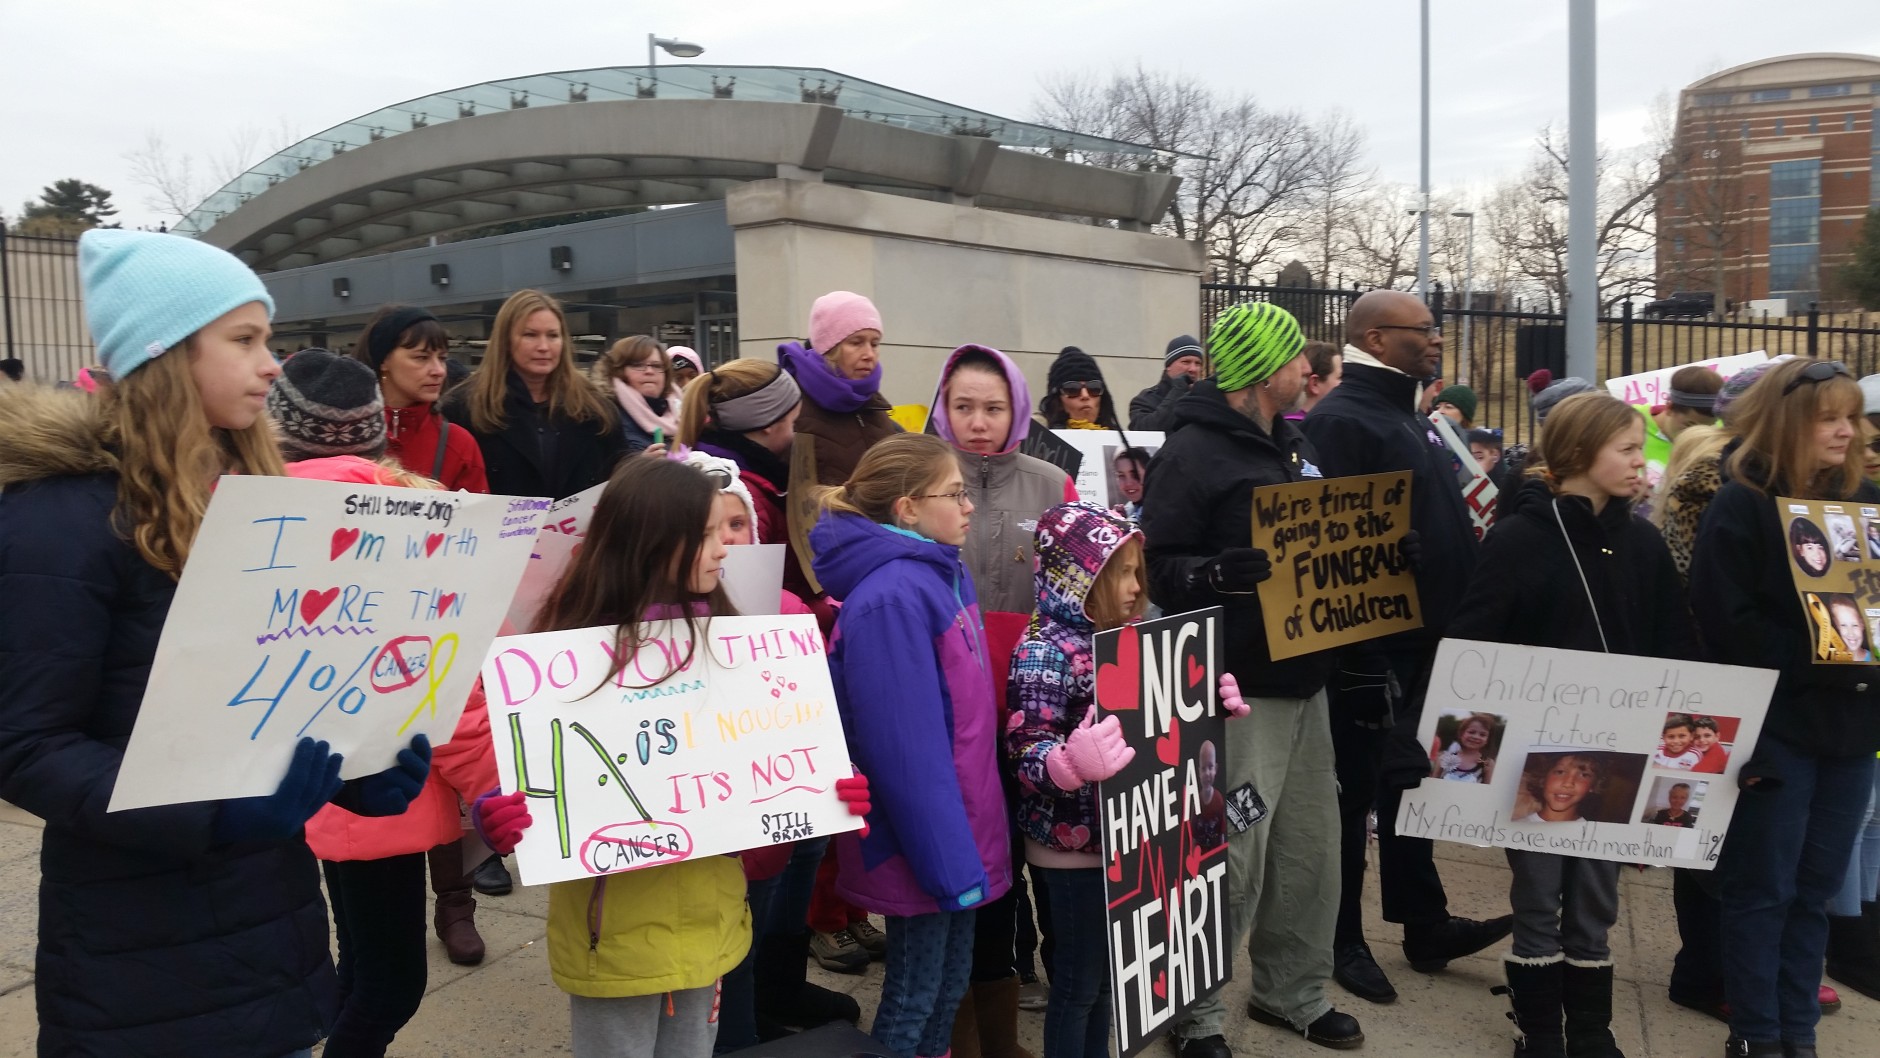 Demonstrators want the government to devote a higher percentage of funding to children's cancer. (WTOP/Allison Keyes)